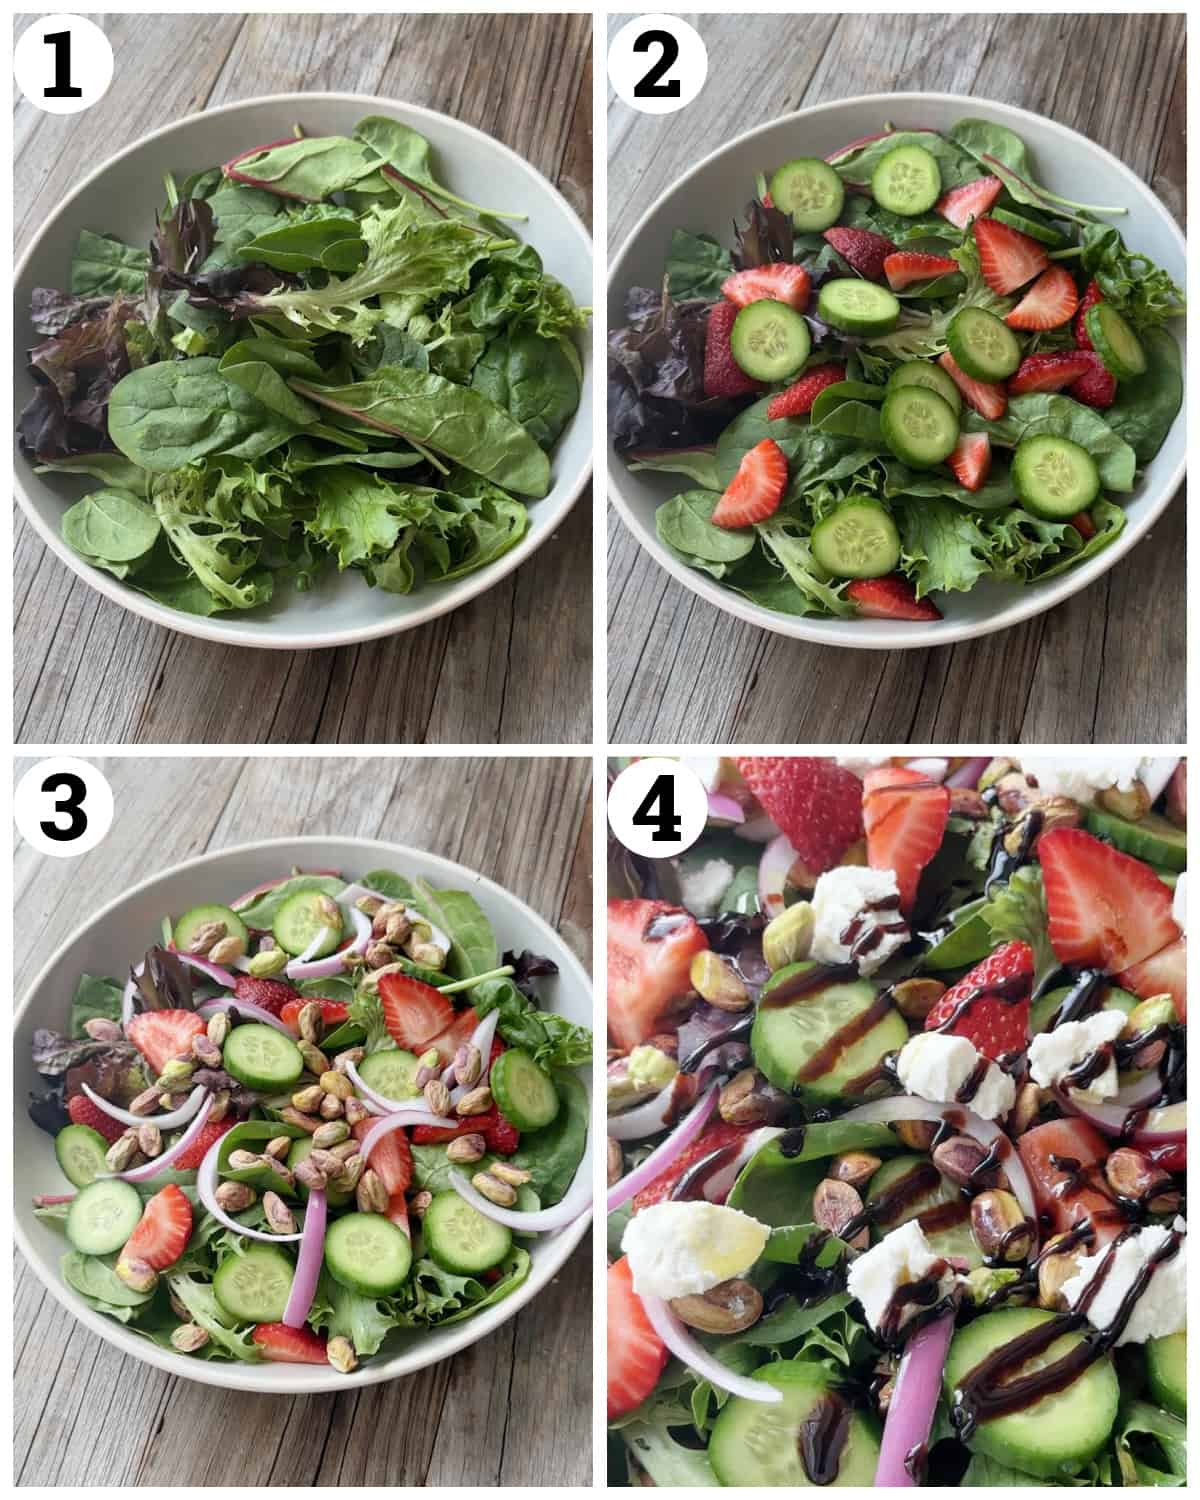 Place the greens in a bowl and top with strawberries, cucumbers and red onions. Add the pistachios and goat cheese. Toss with balsamic and olive oil. 